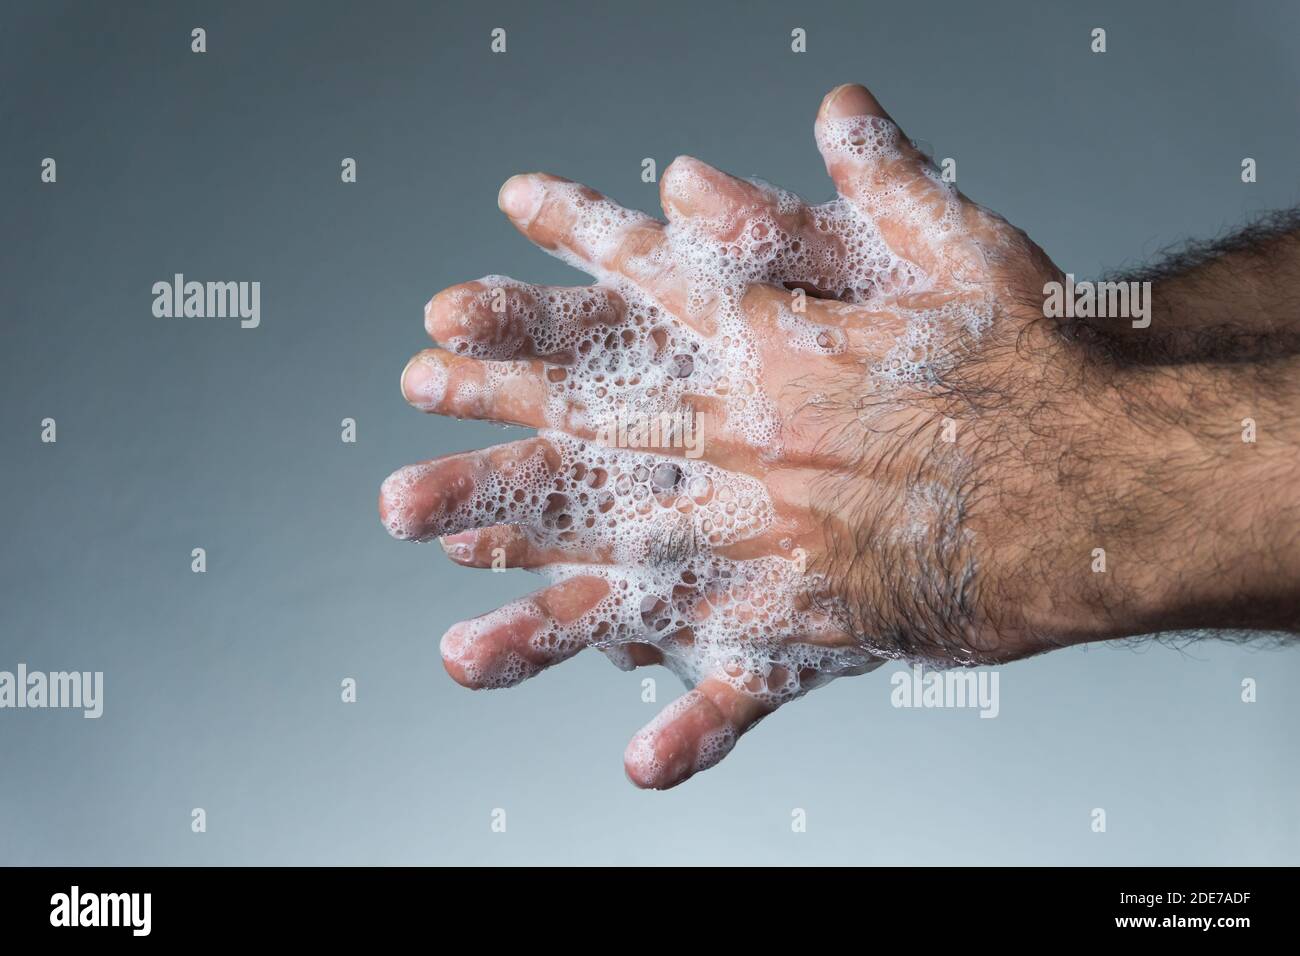 Man washing and rubbing hands with soap for corona virus prevention, hygiene to stop spreading coronavirus. Stock Photo